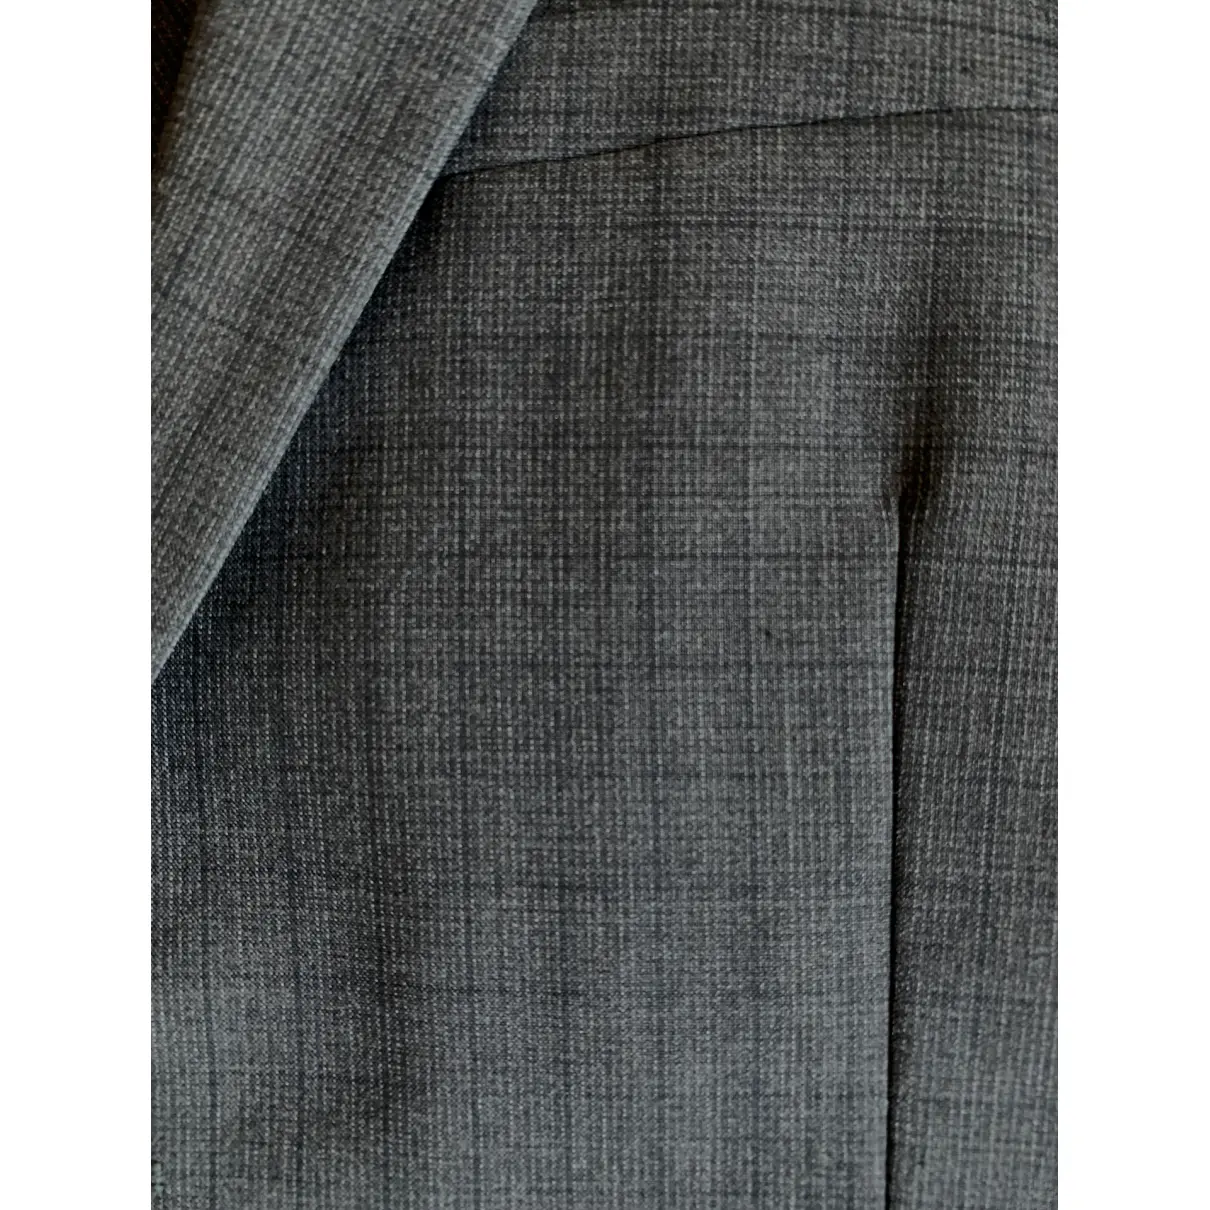 Wool suit Theory